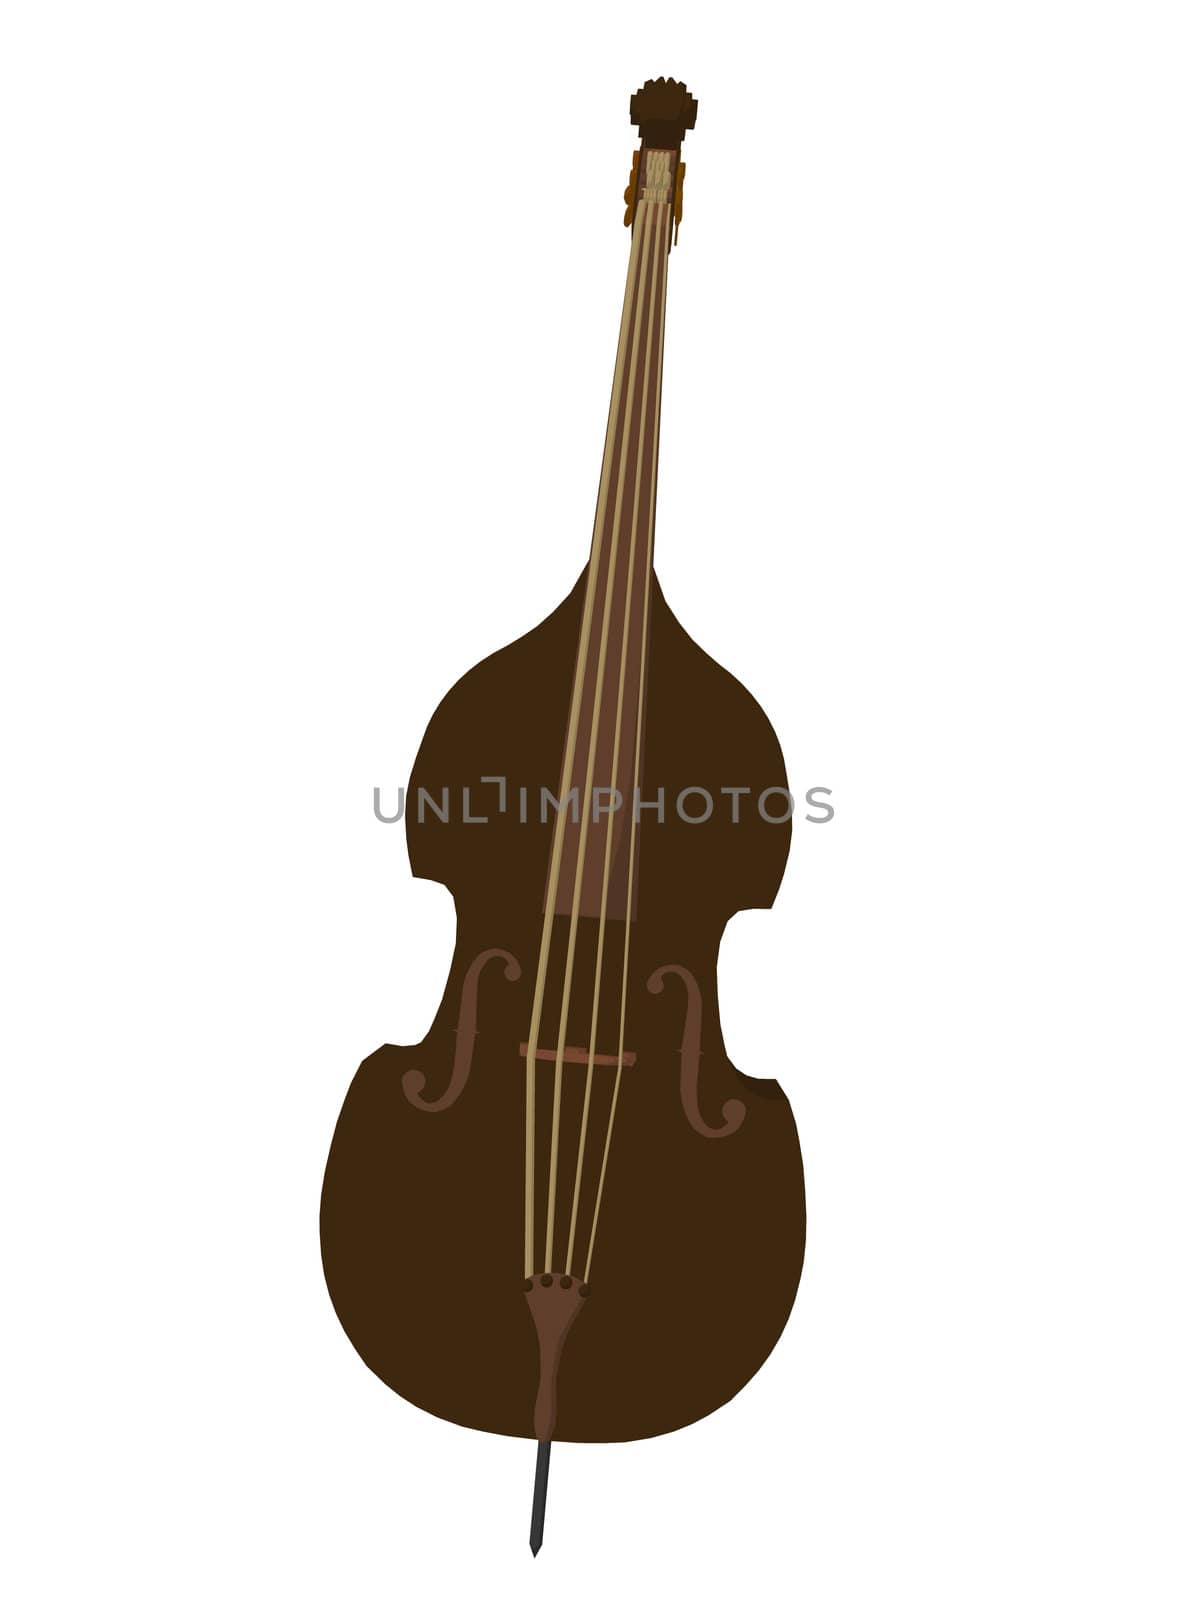 Illustration of a bass on a white background